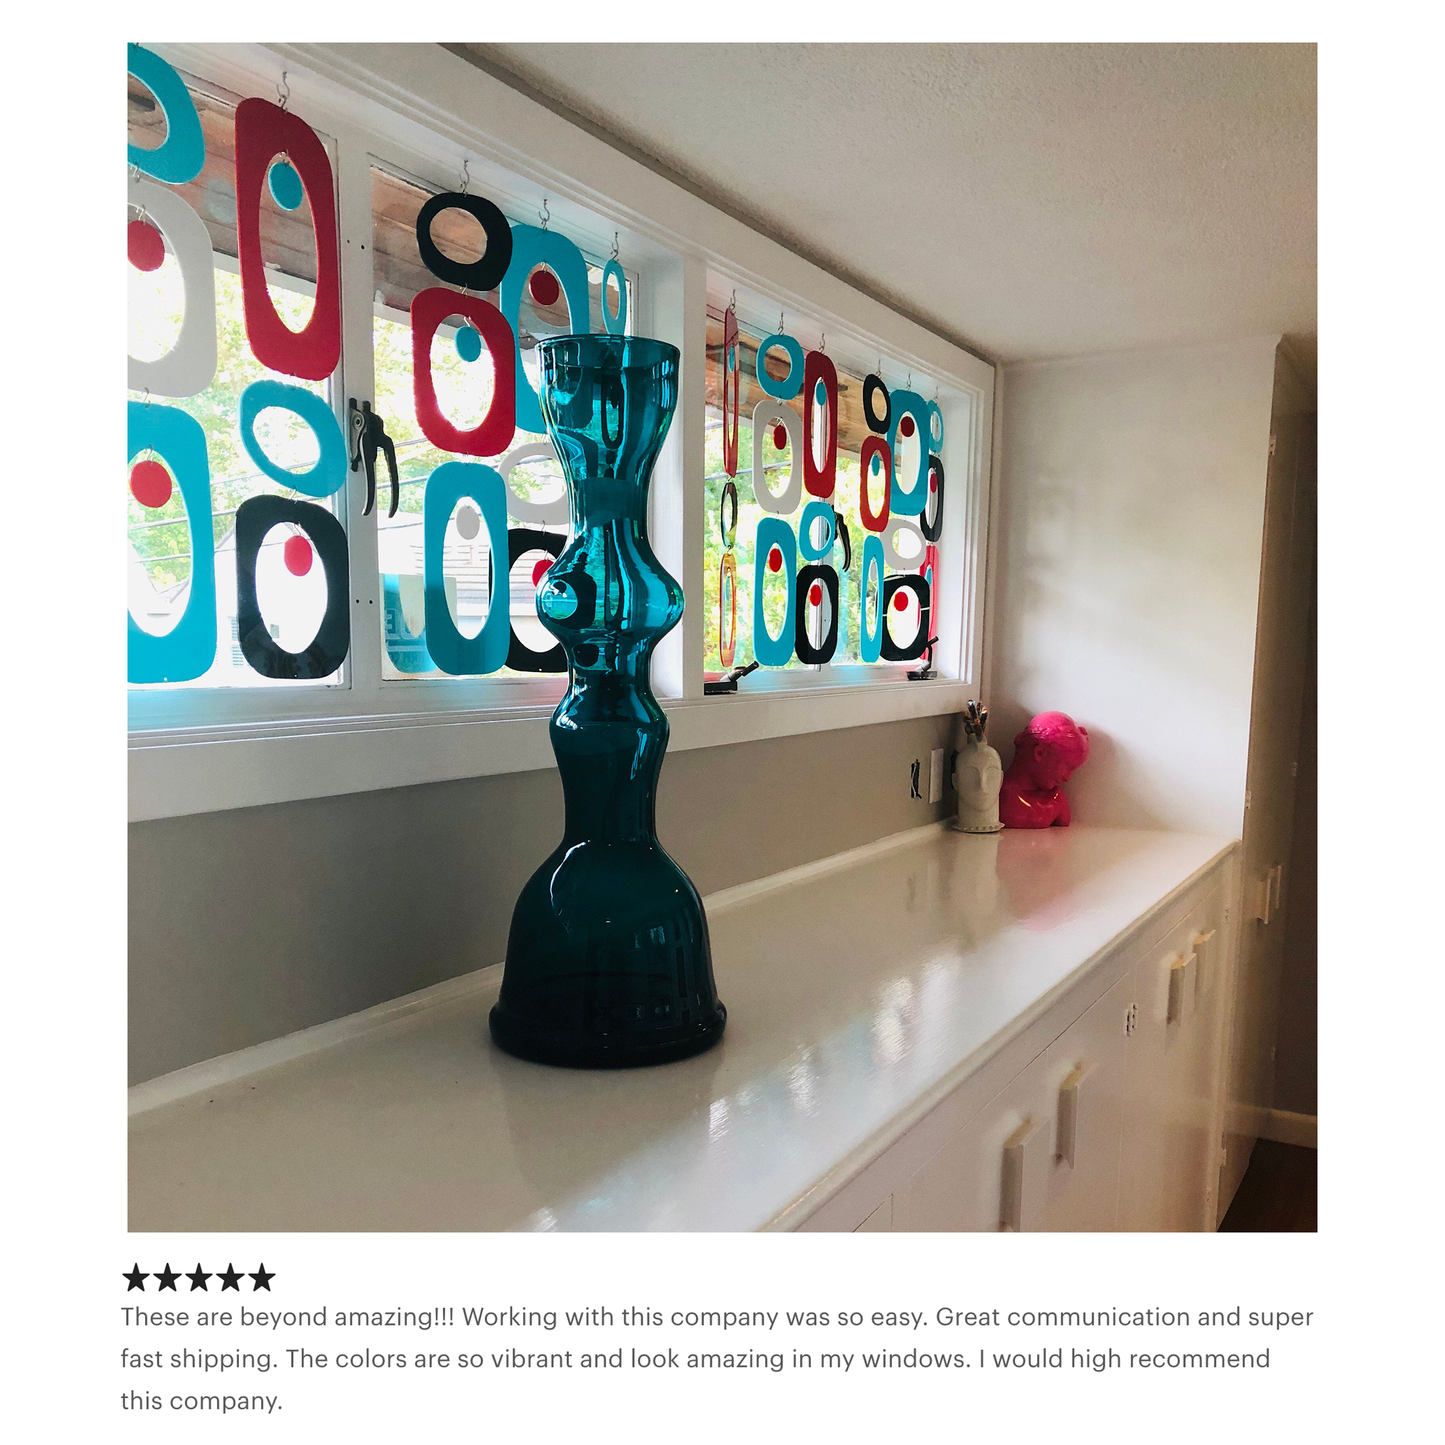 Customer review of red aqua black and gray retro mid century modern window treatment by AtomicMobiles.com